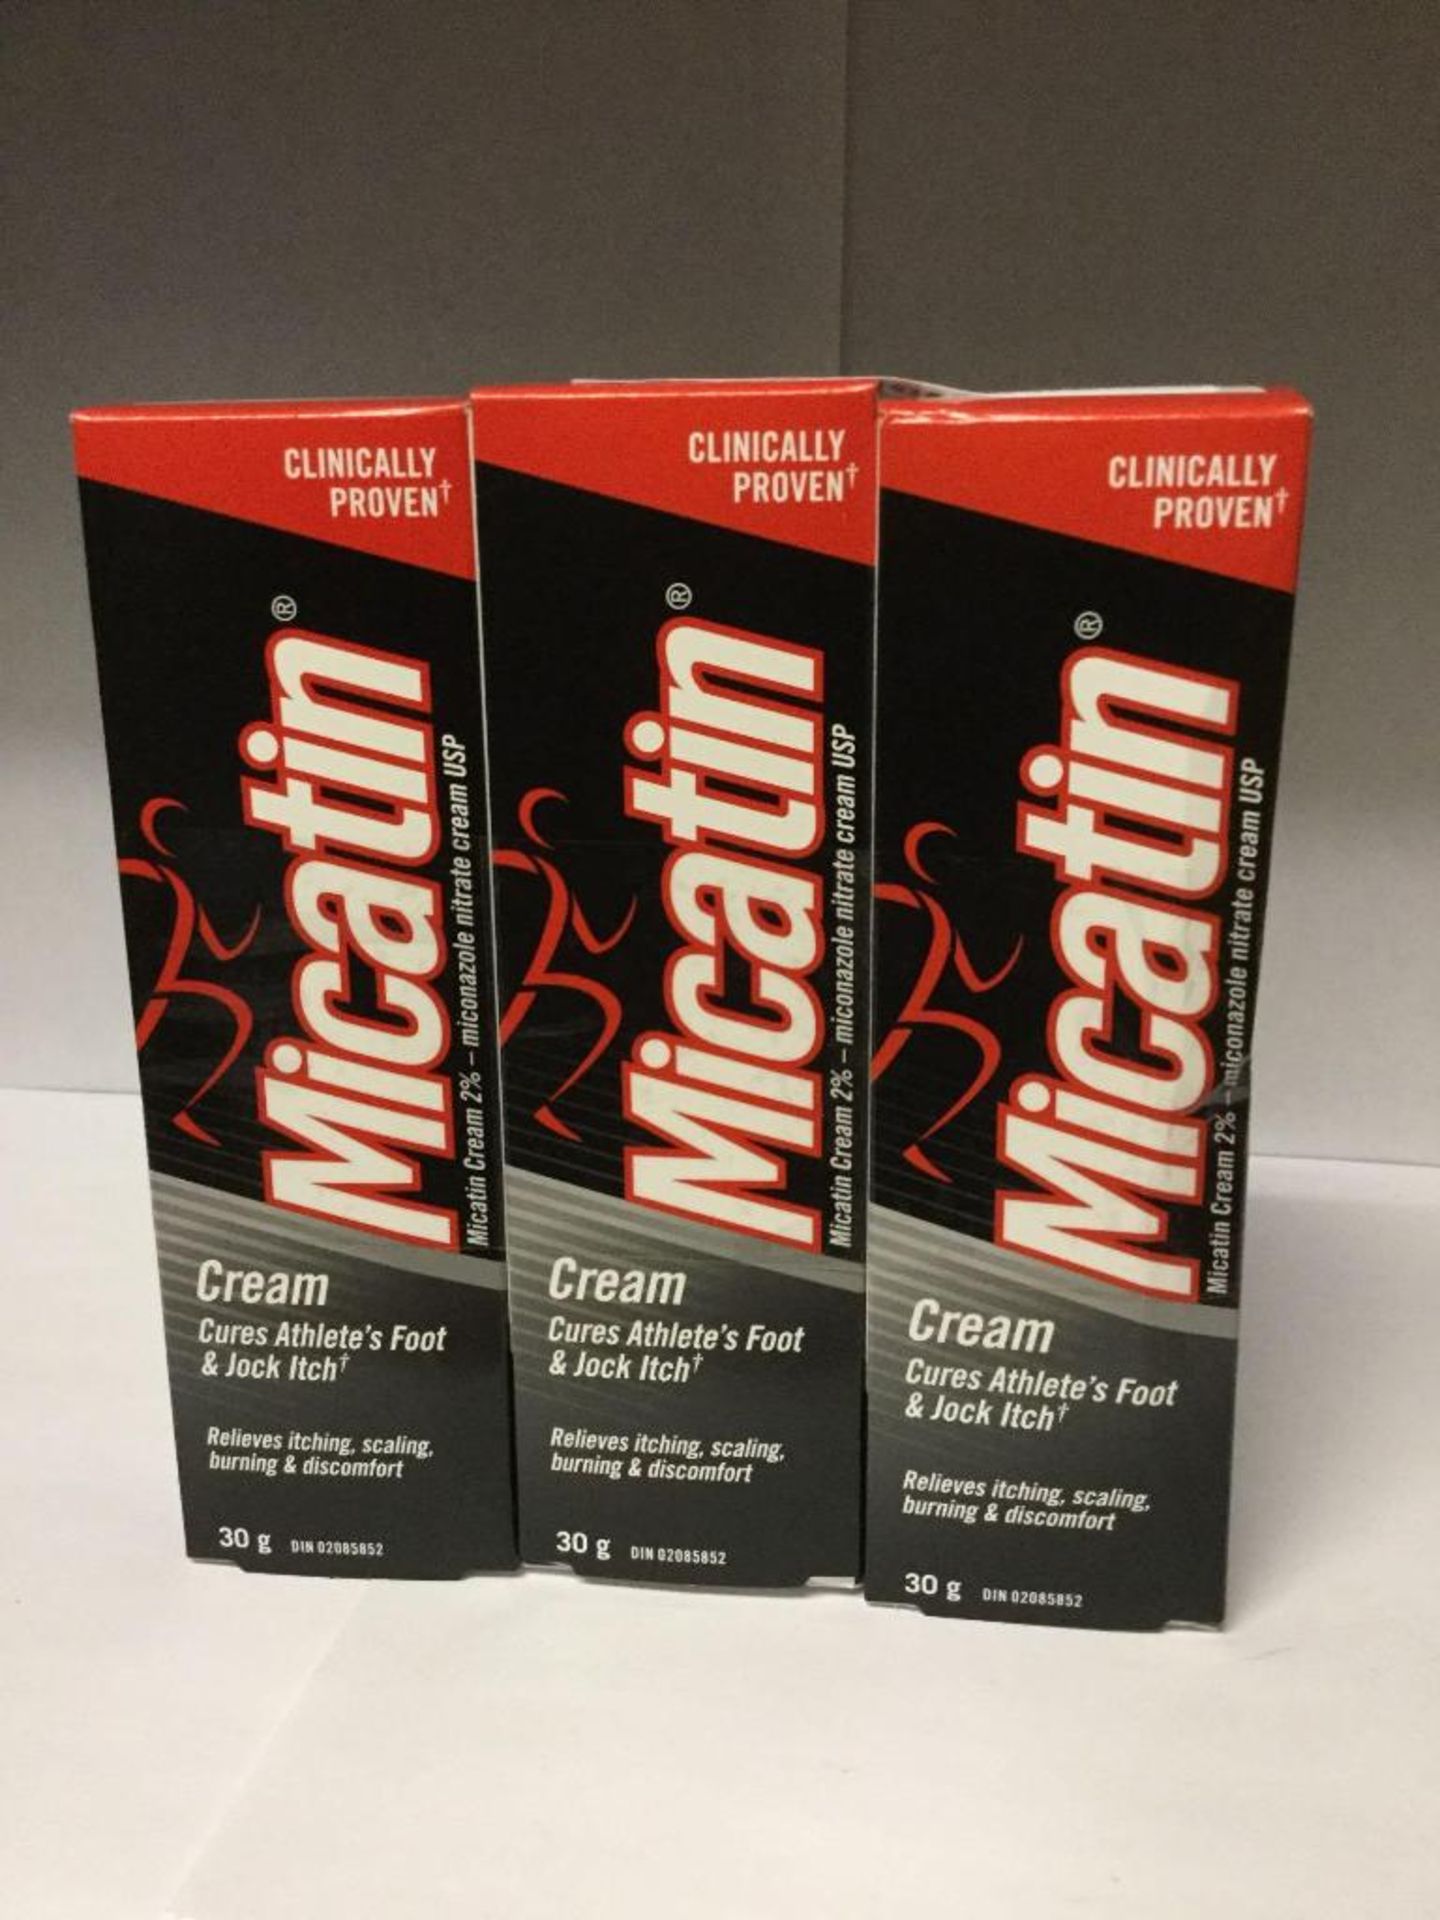 Lot of 3 30 g Micatin Cream Cures Athlete's Foot and Jock Itch